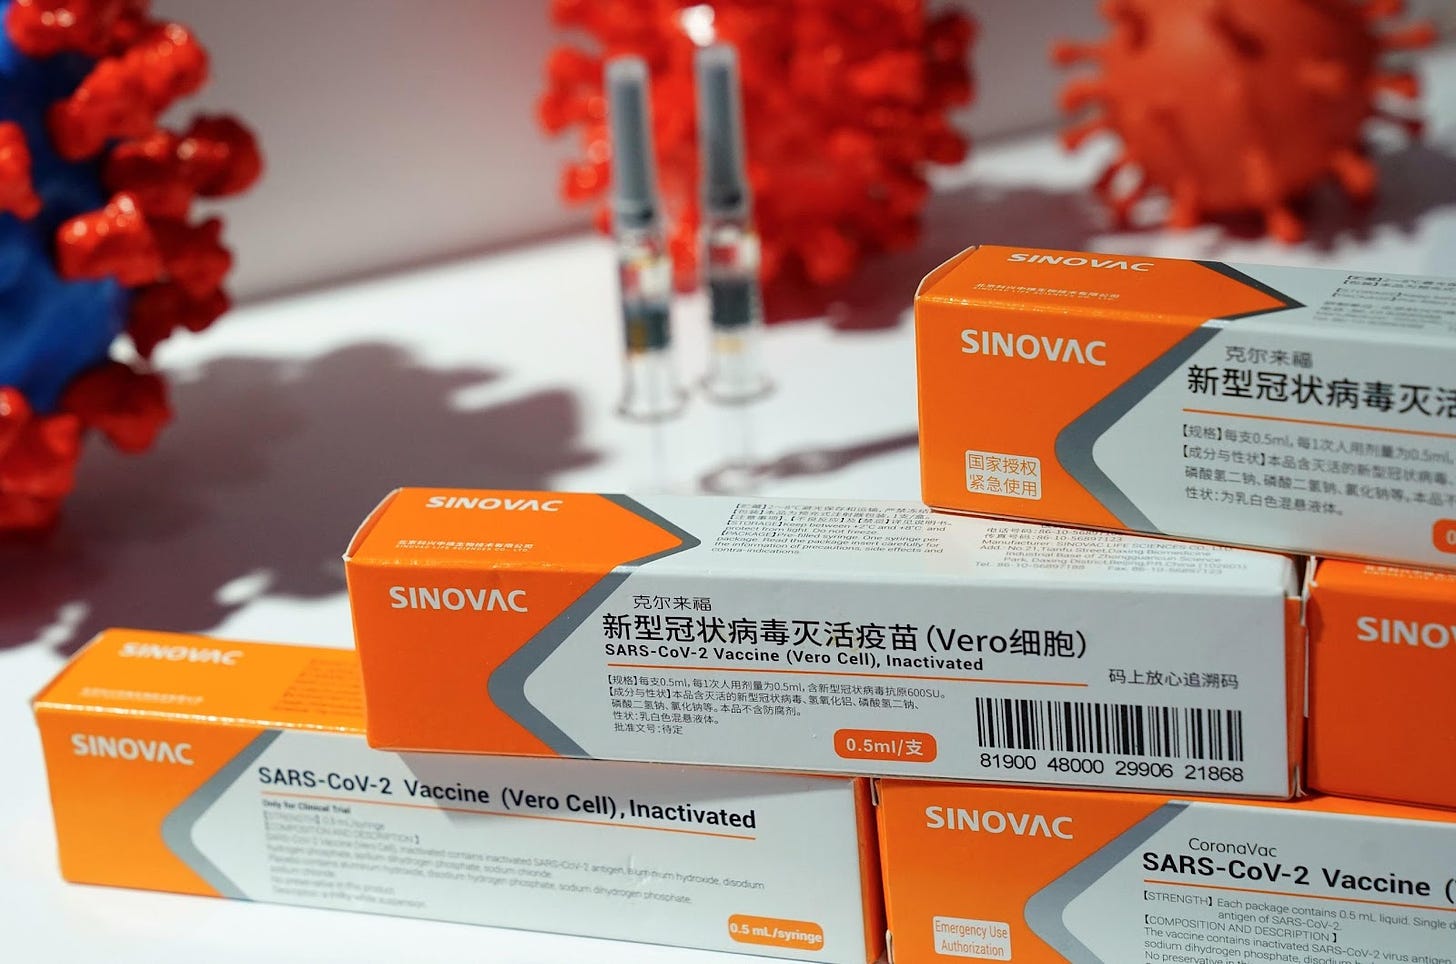 A booth displaying a coronavirus vaccine candidate from Sinovac Biotech Ltd is seen at the 2020 China International Fair for Trade in Services (CIFTIS), following the COVID-19 outbreak, in Beijing, China September 4, 2020. REUTERS/Tingshu Wang